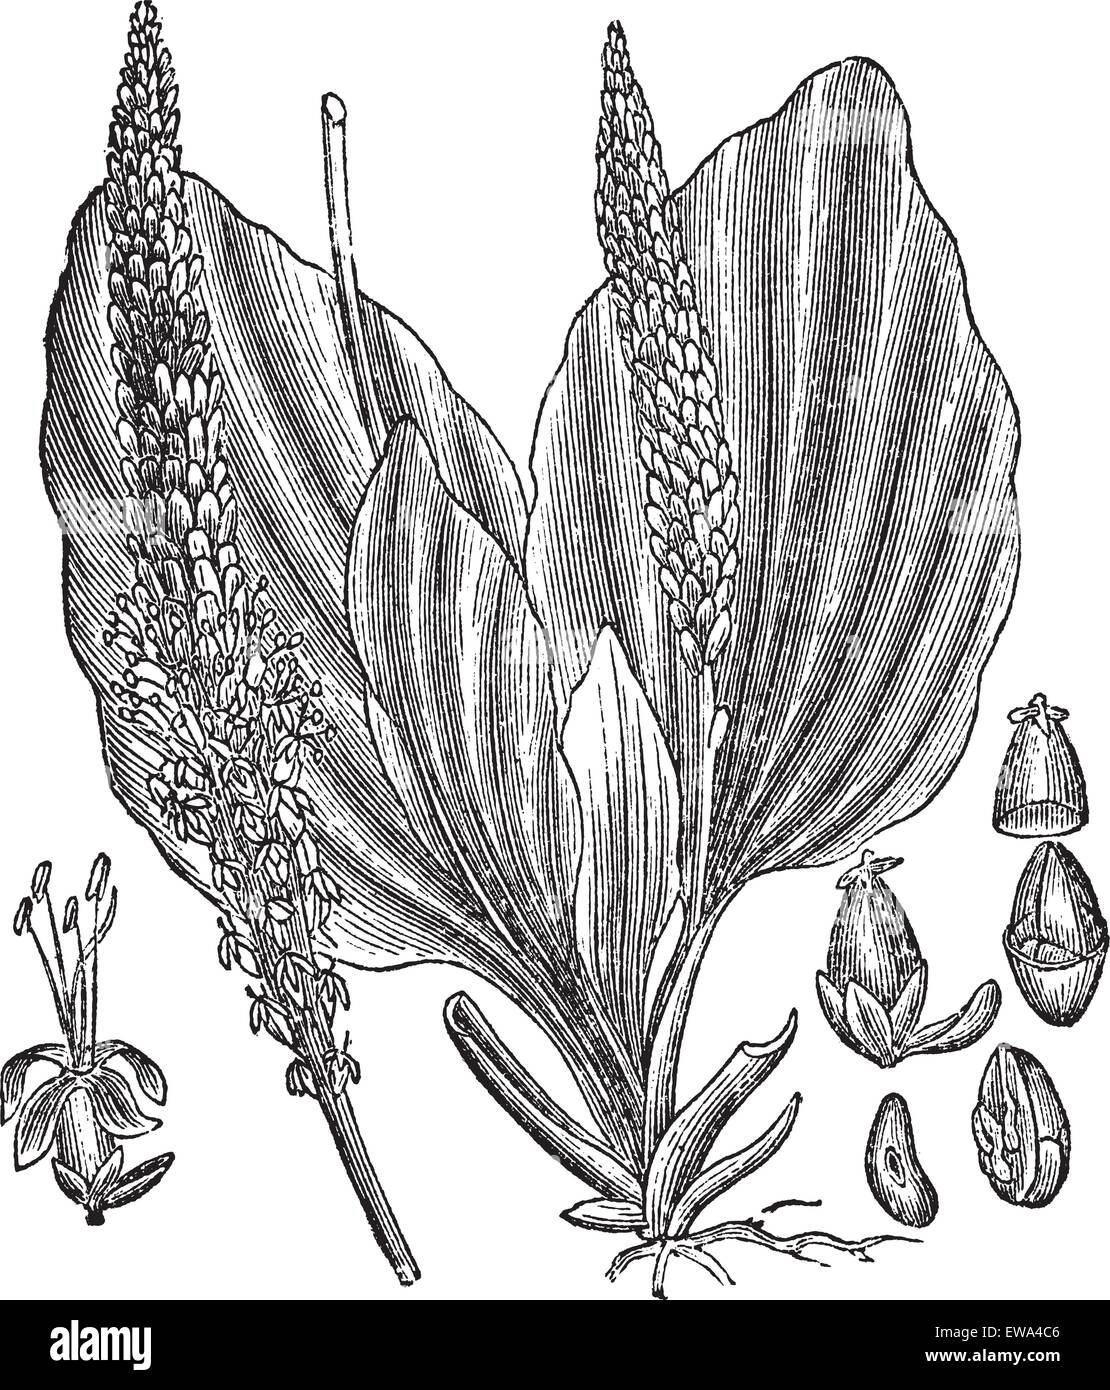 Greater Plantain or Plantago major, vintage engraved illustration, showing flower (left and center) and seeds (right). Trousset Stock Vector